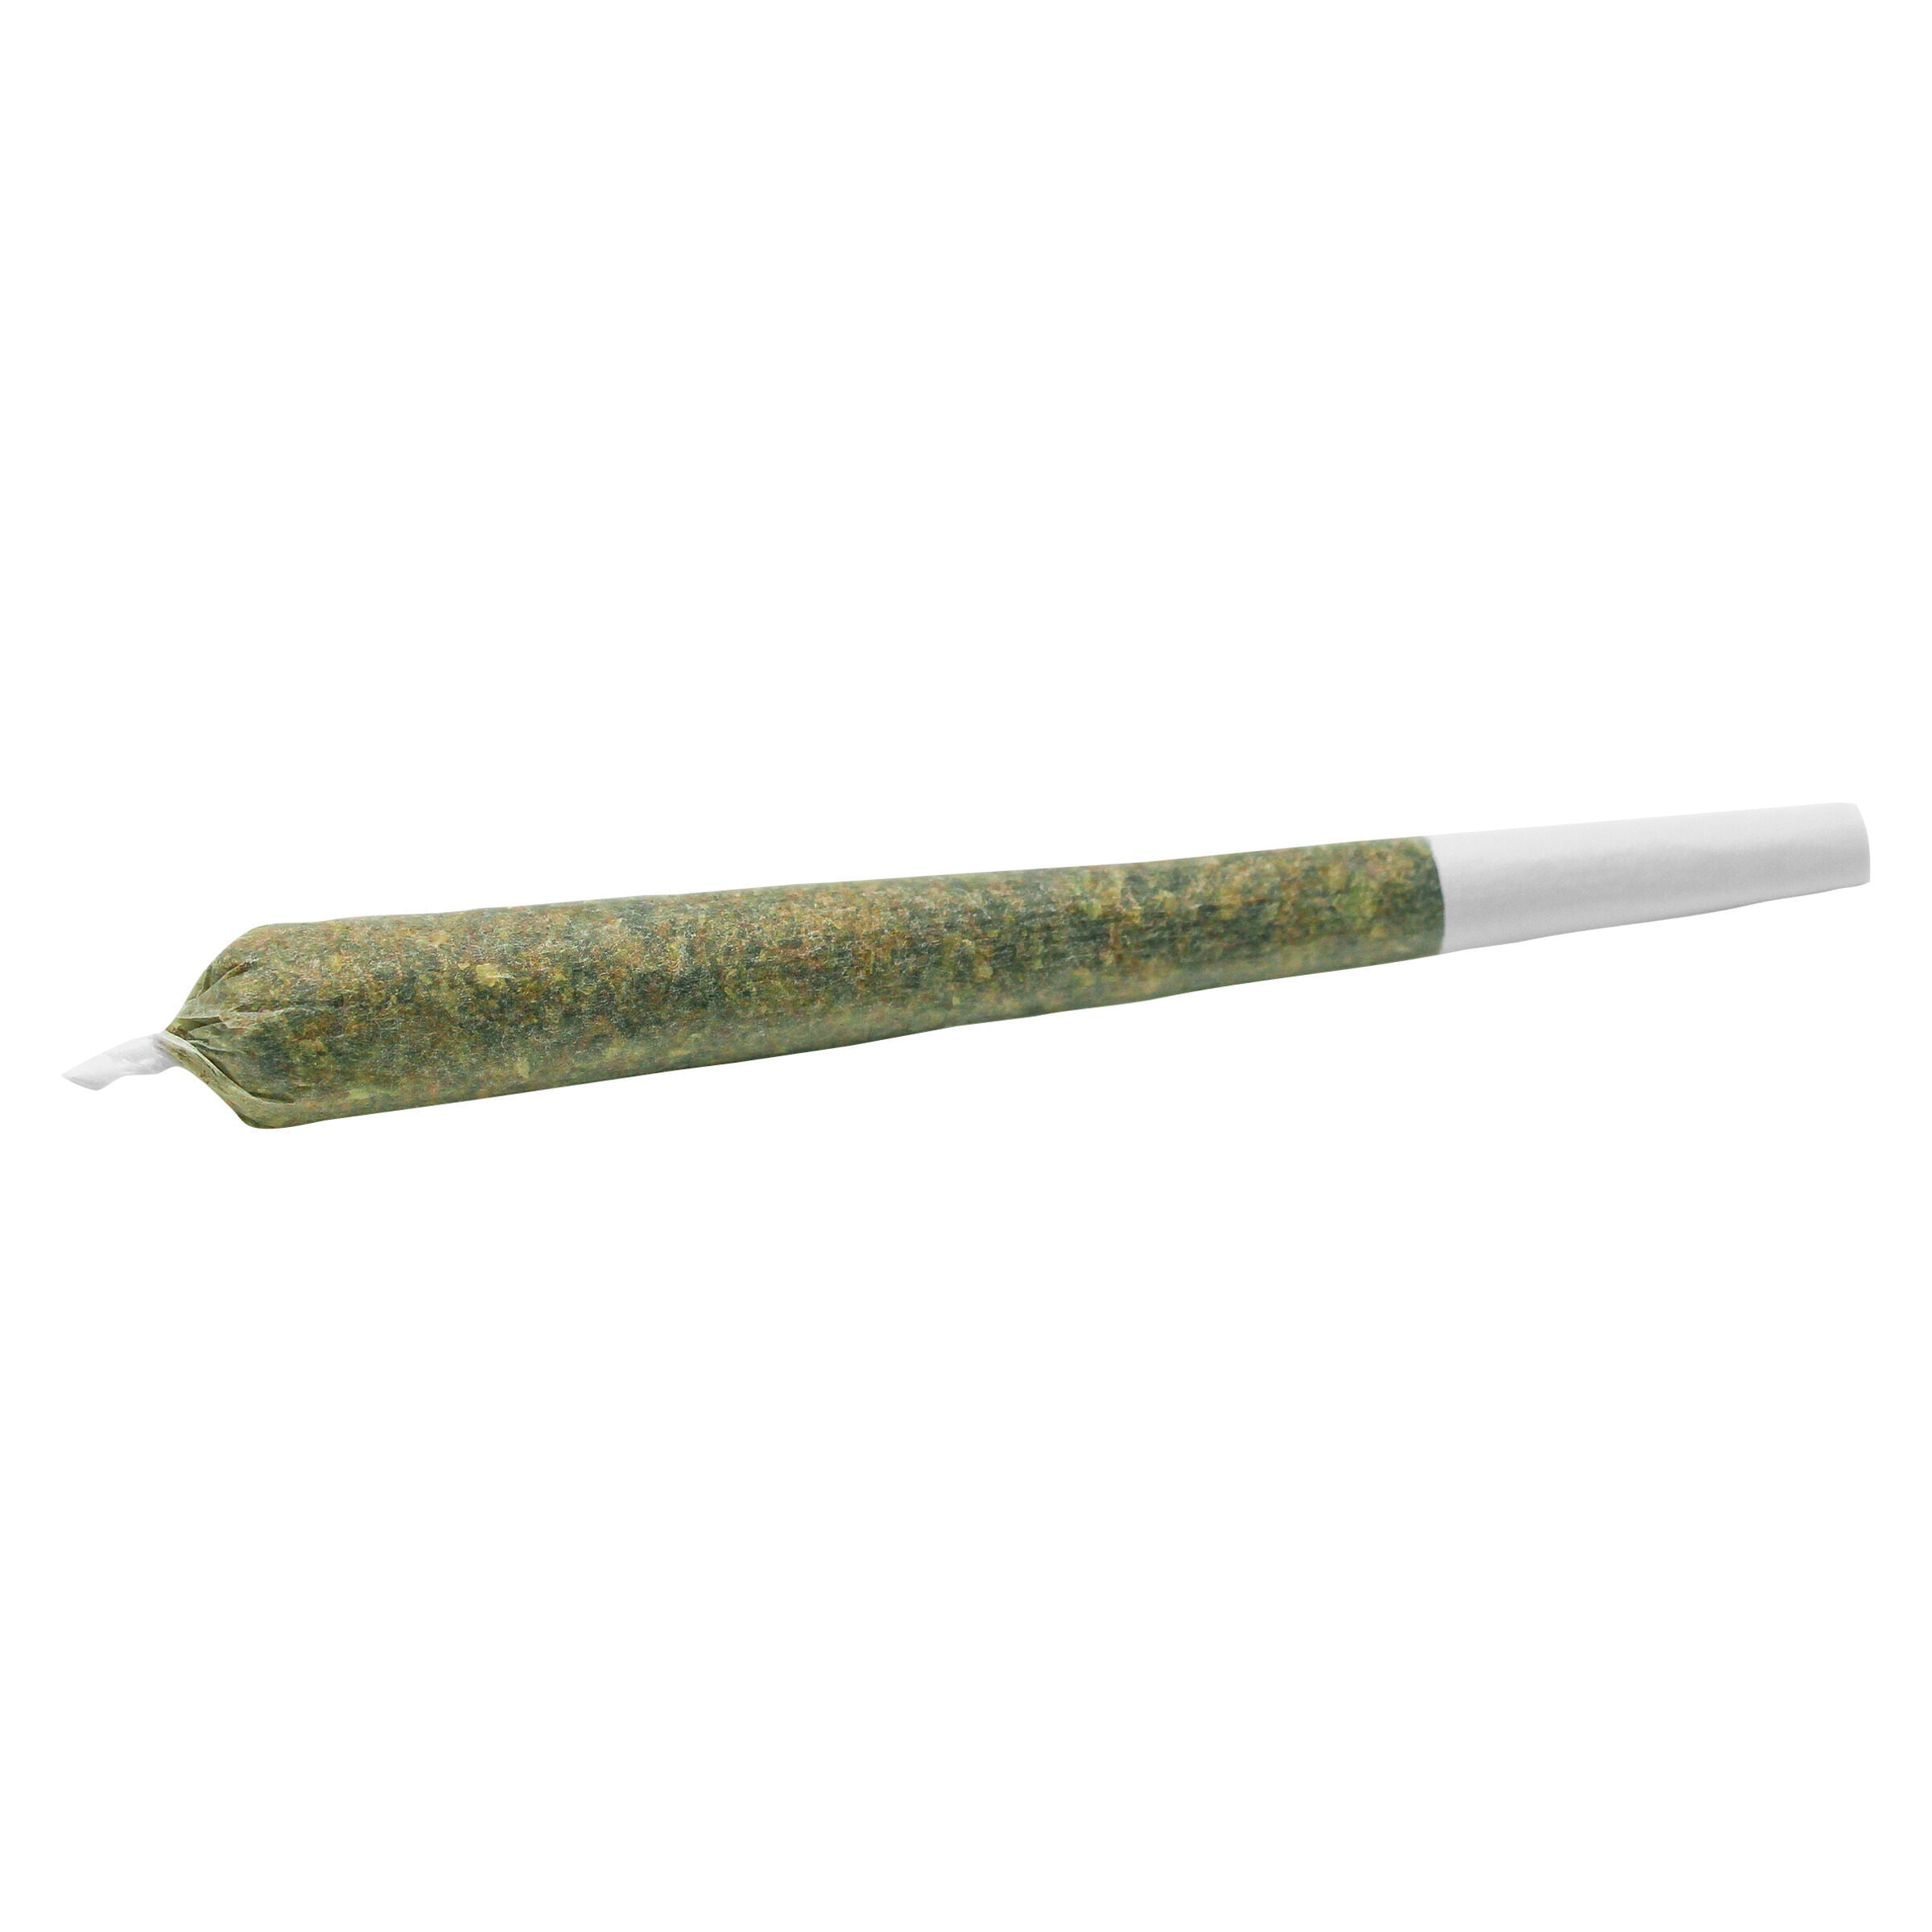 Cannabis Product Rockstar Kush Pre-Roll by Spinach - 3